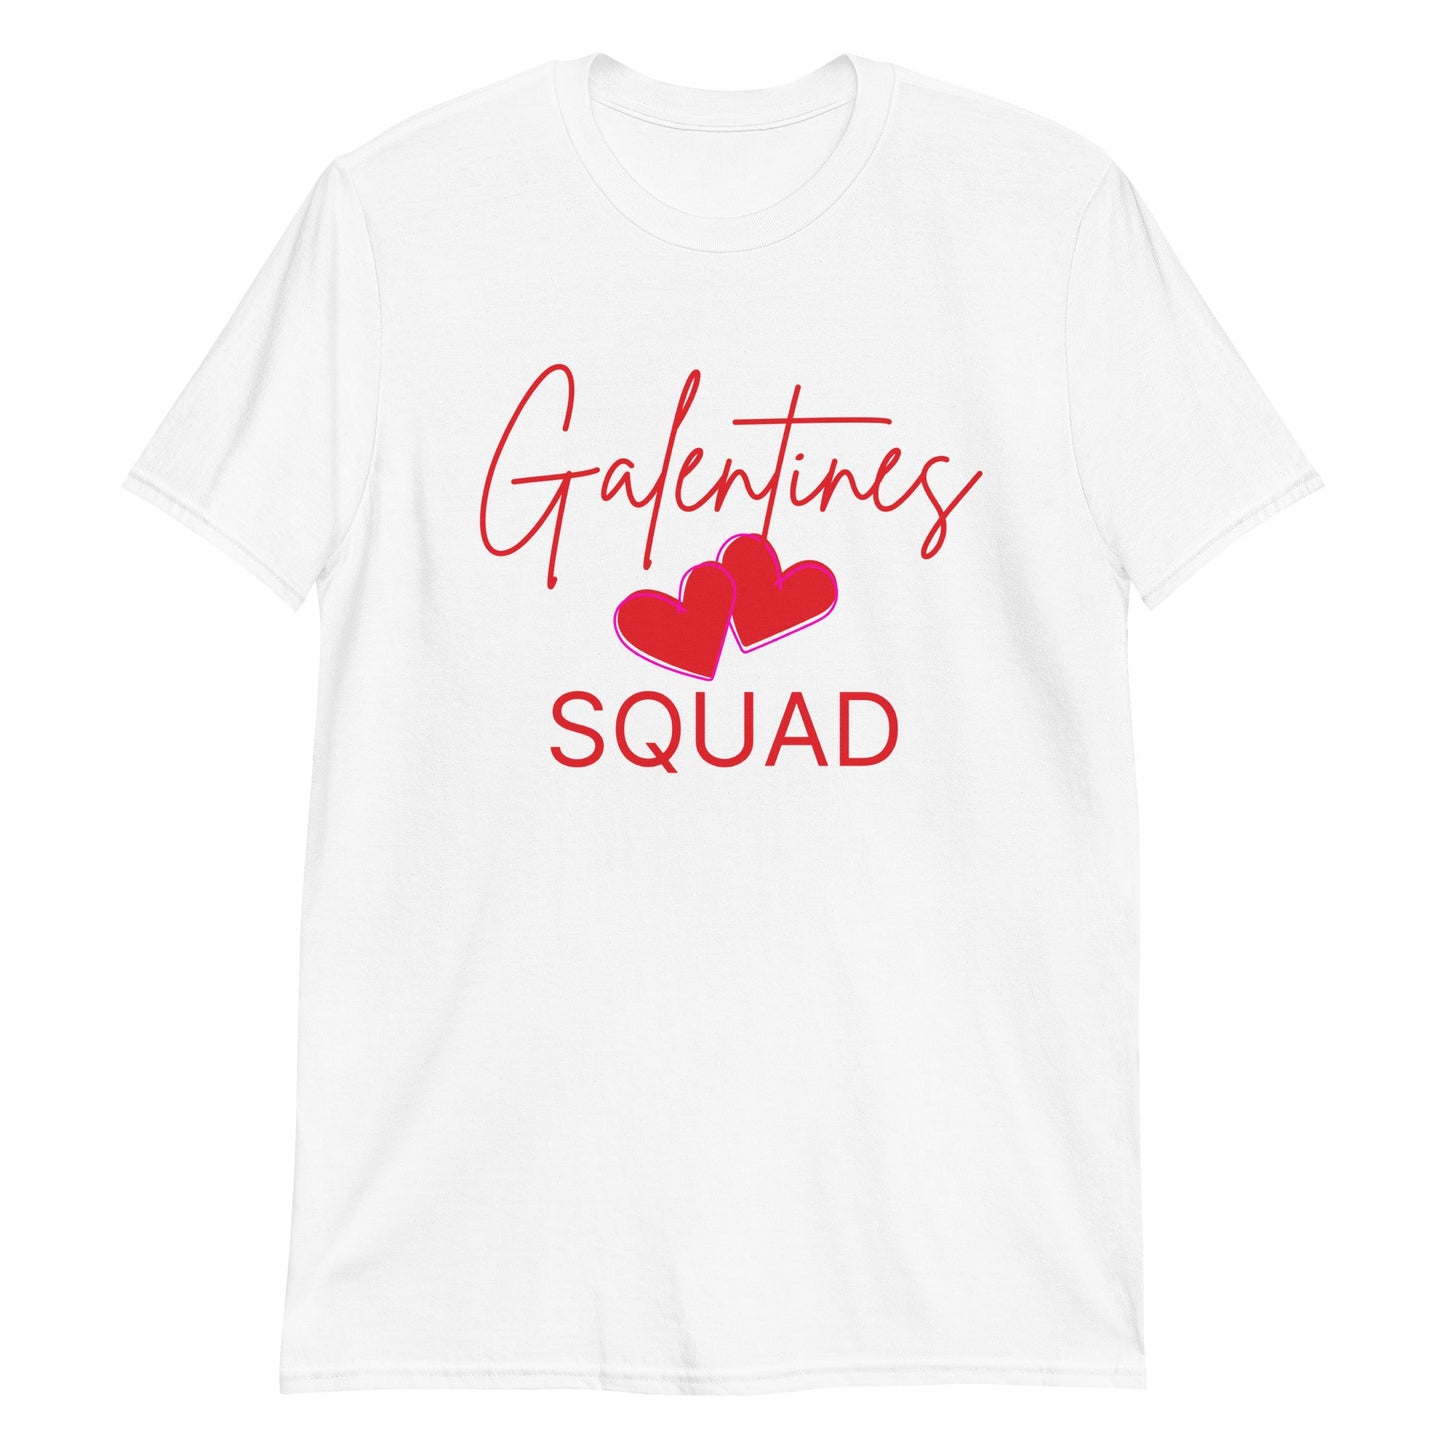 Galentines Squad Short-Sleeve Unisex T-Shirt (For A Slim Fit Order A Size Down) - Catch This Tea Shirts